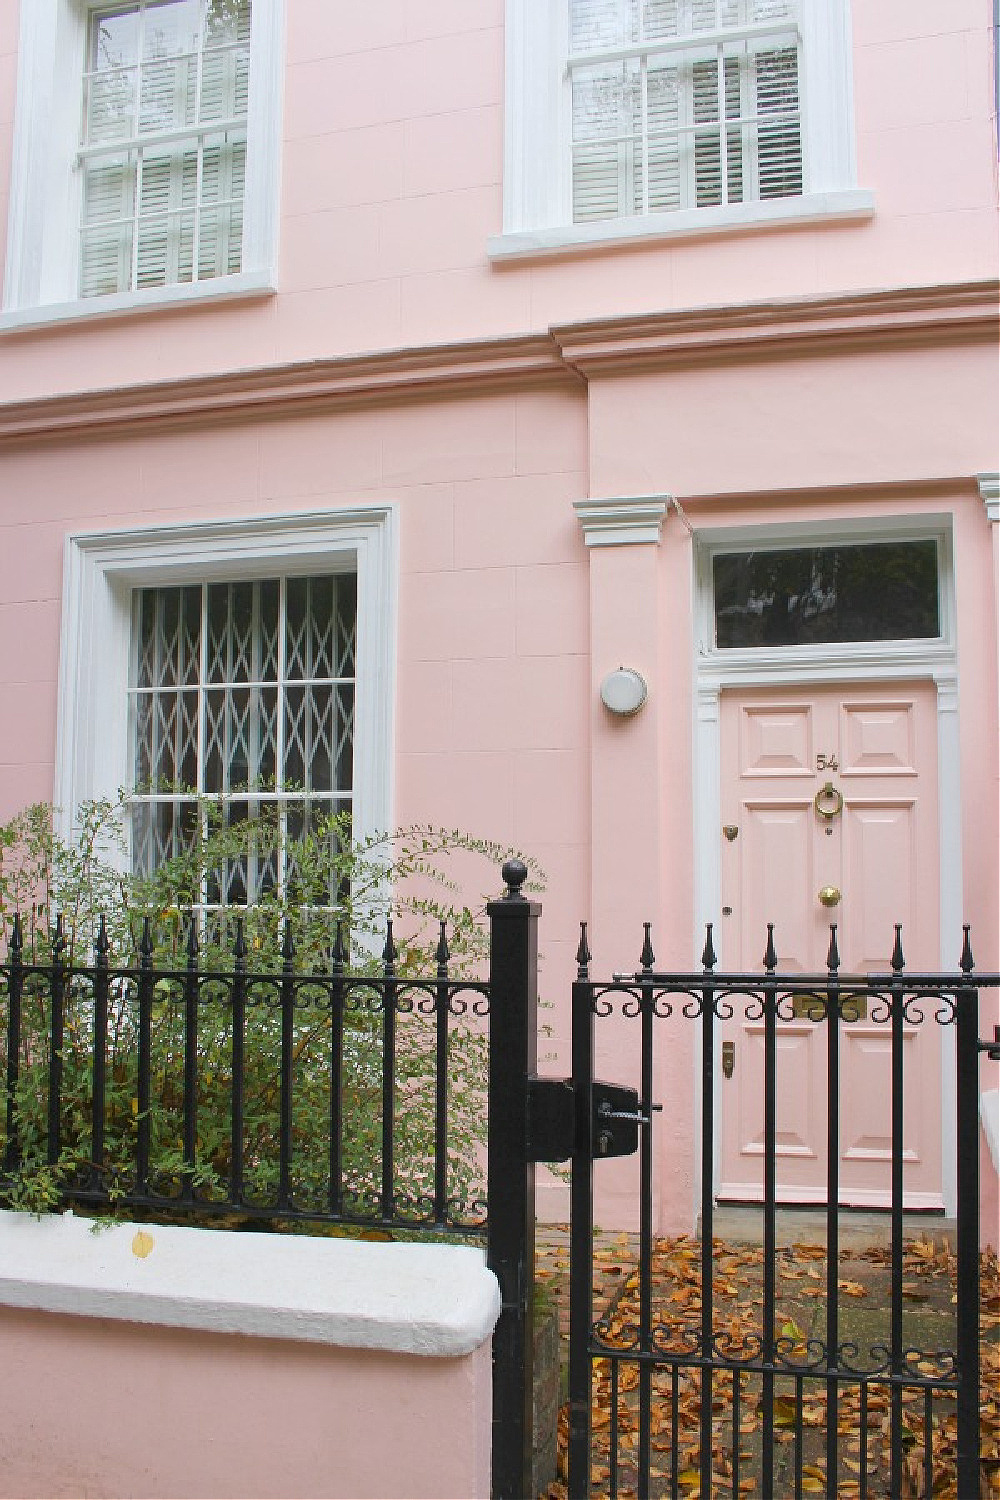 Beautiful sophisticated pink door and house exterior in Notting Hill. Come explore paint colors for your front door. #frontdoorcolors #paintcolors #curbappeal